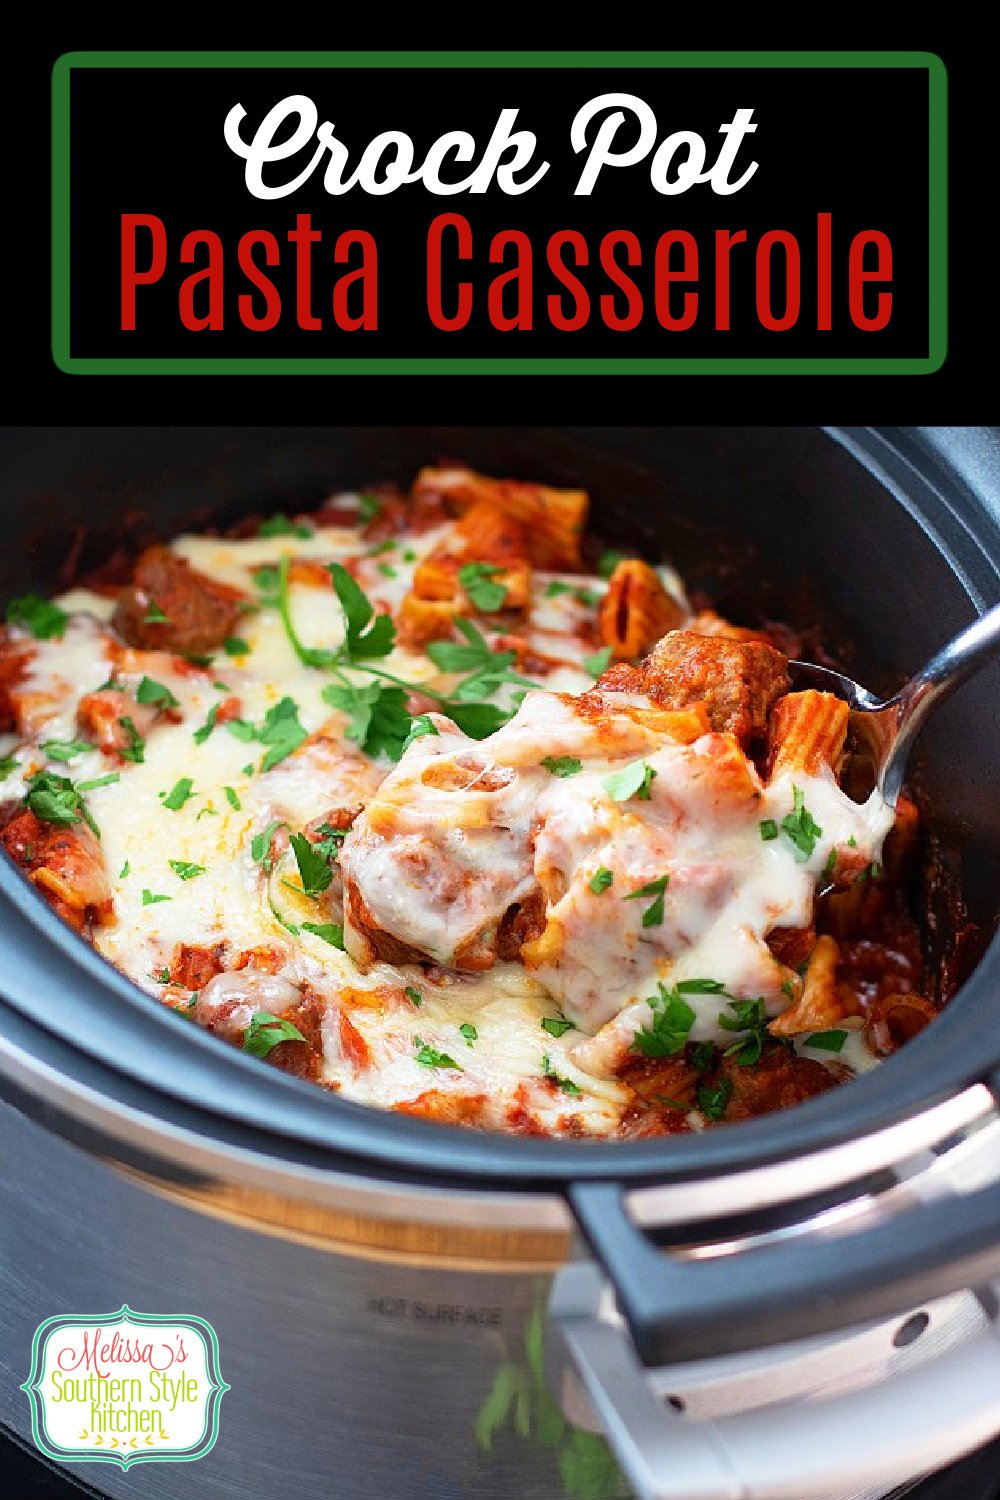 Simmer the sauce for this Crock Pot Pasta Casserole low and slow then add pasta for an Italian inspired family pleasing dinner #crockpotpastacasserole #crockpotrecipes #slowcookerpasta #pastasauce #slowcookedrigatoni #easypastarecipes #Italianrecipes #pastacasserole